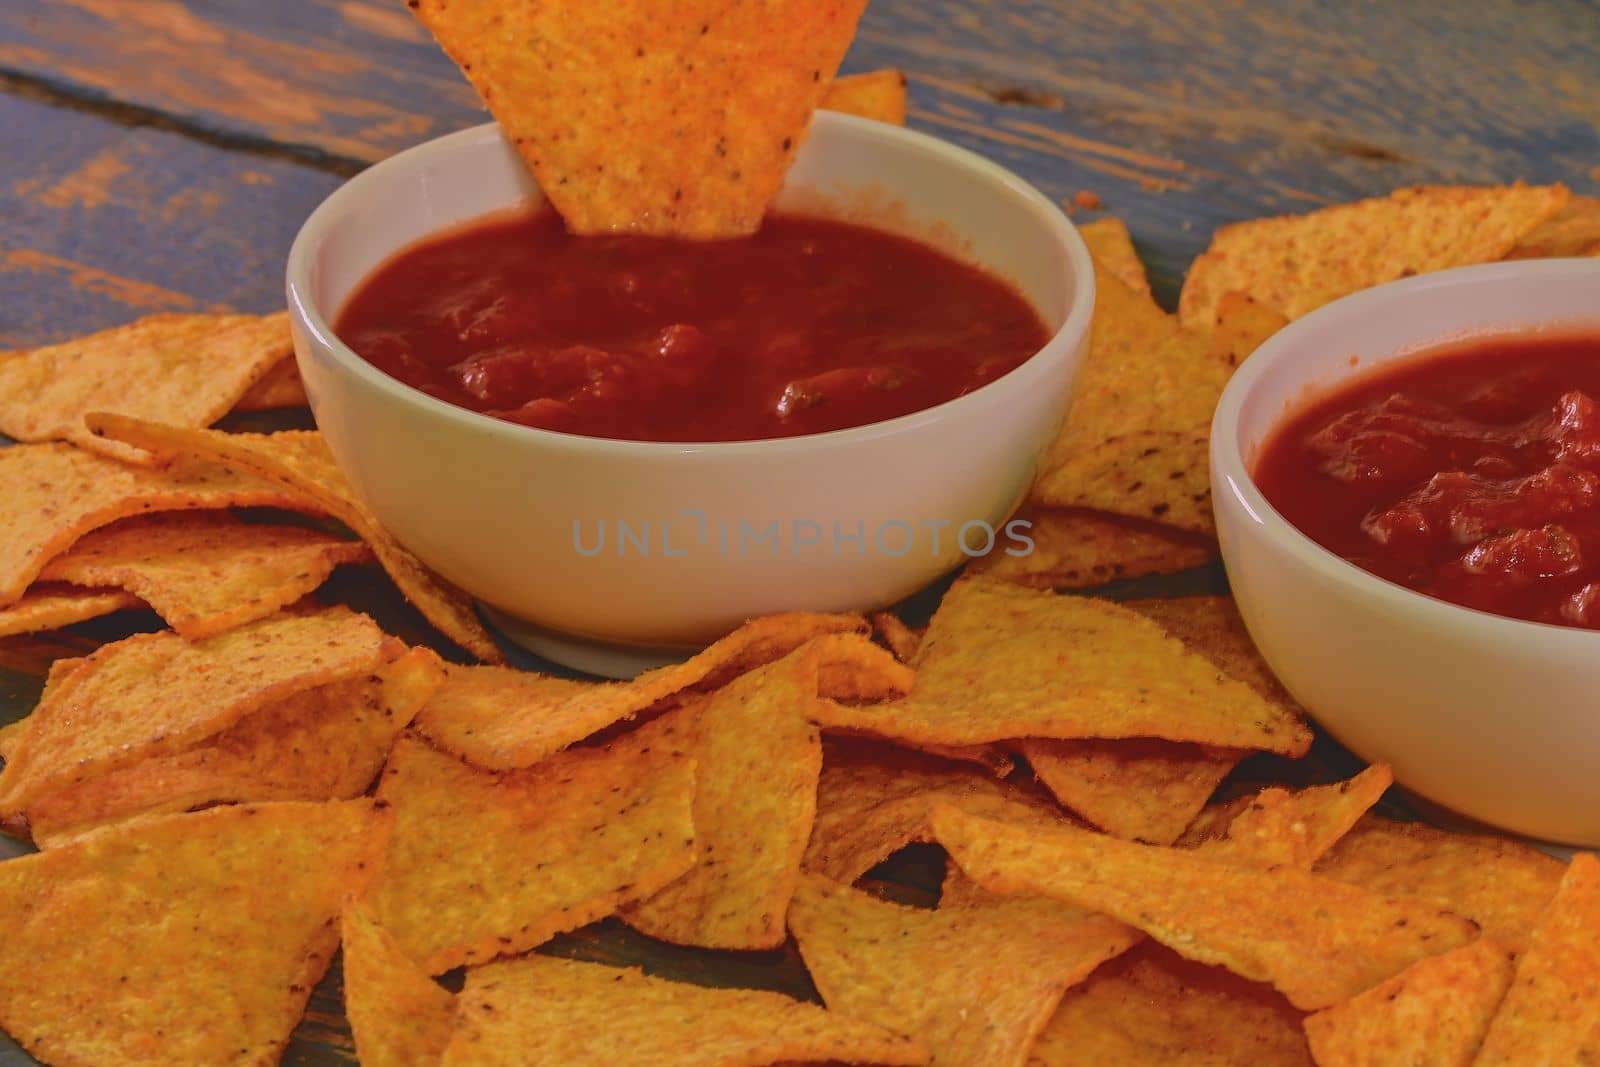 Chili corn-chips with salsa dip on wooden background. 